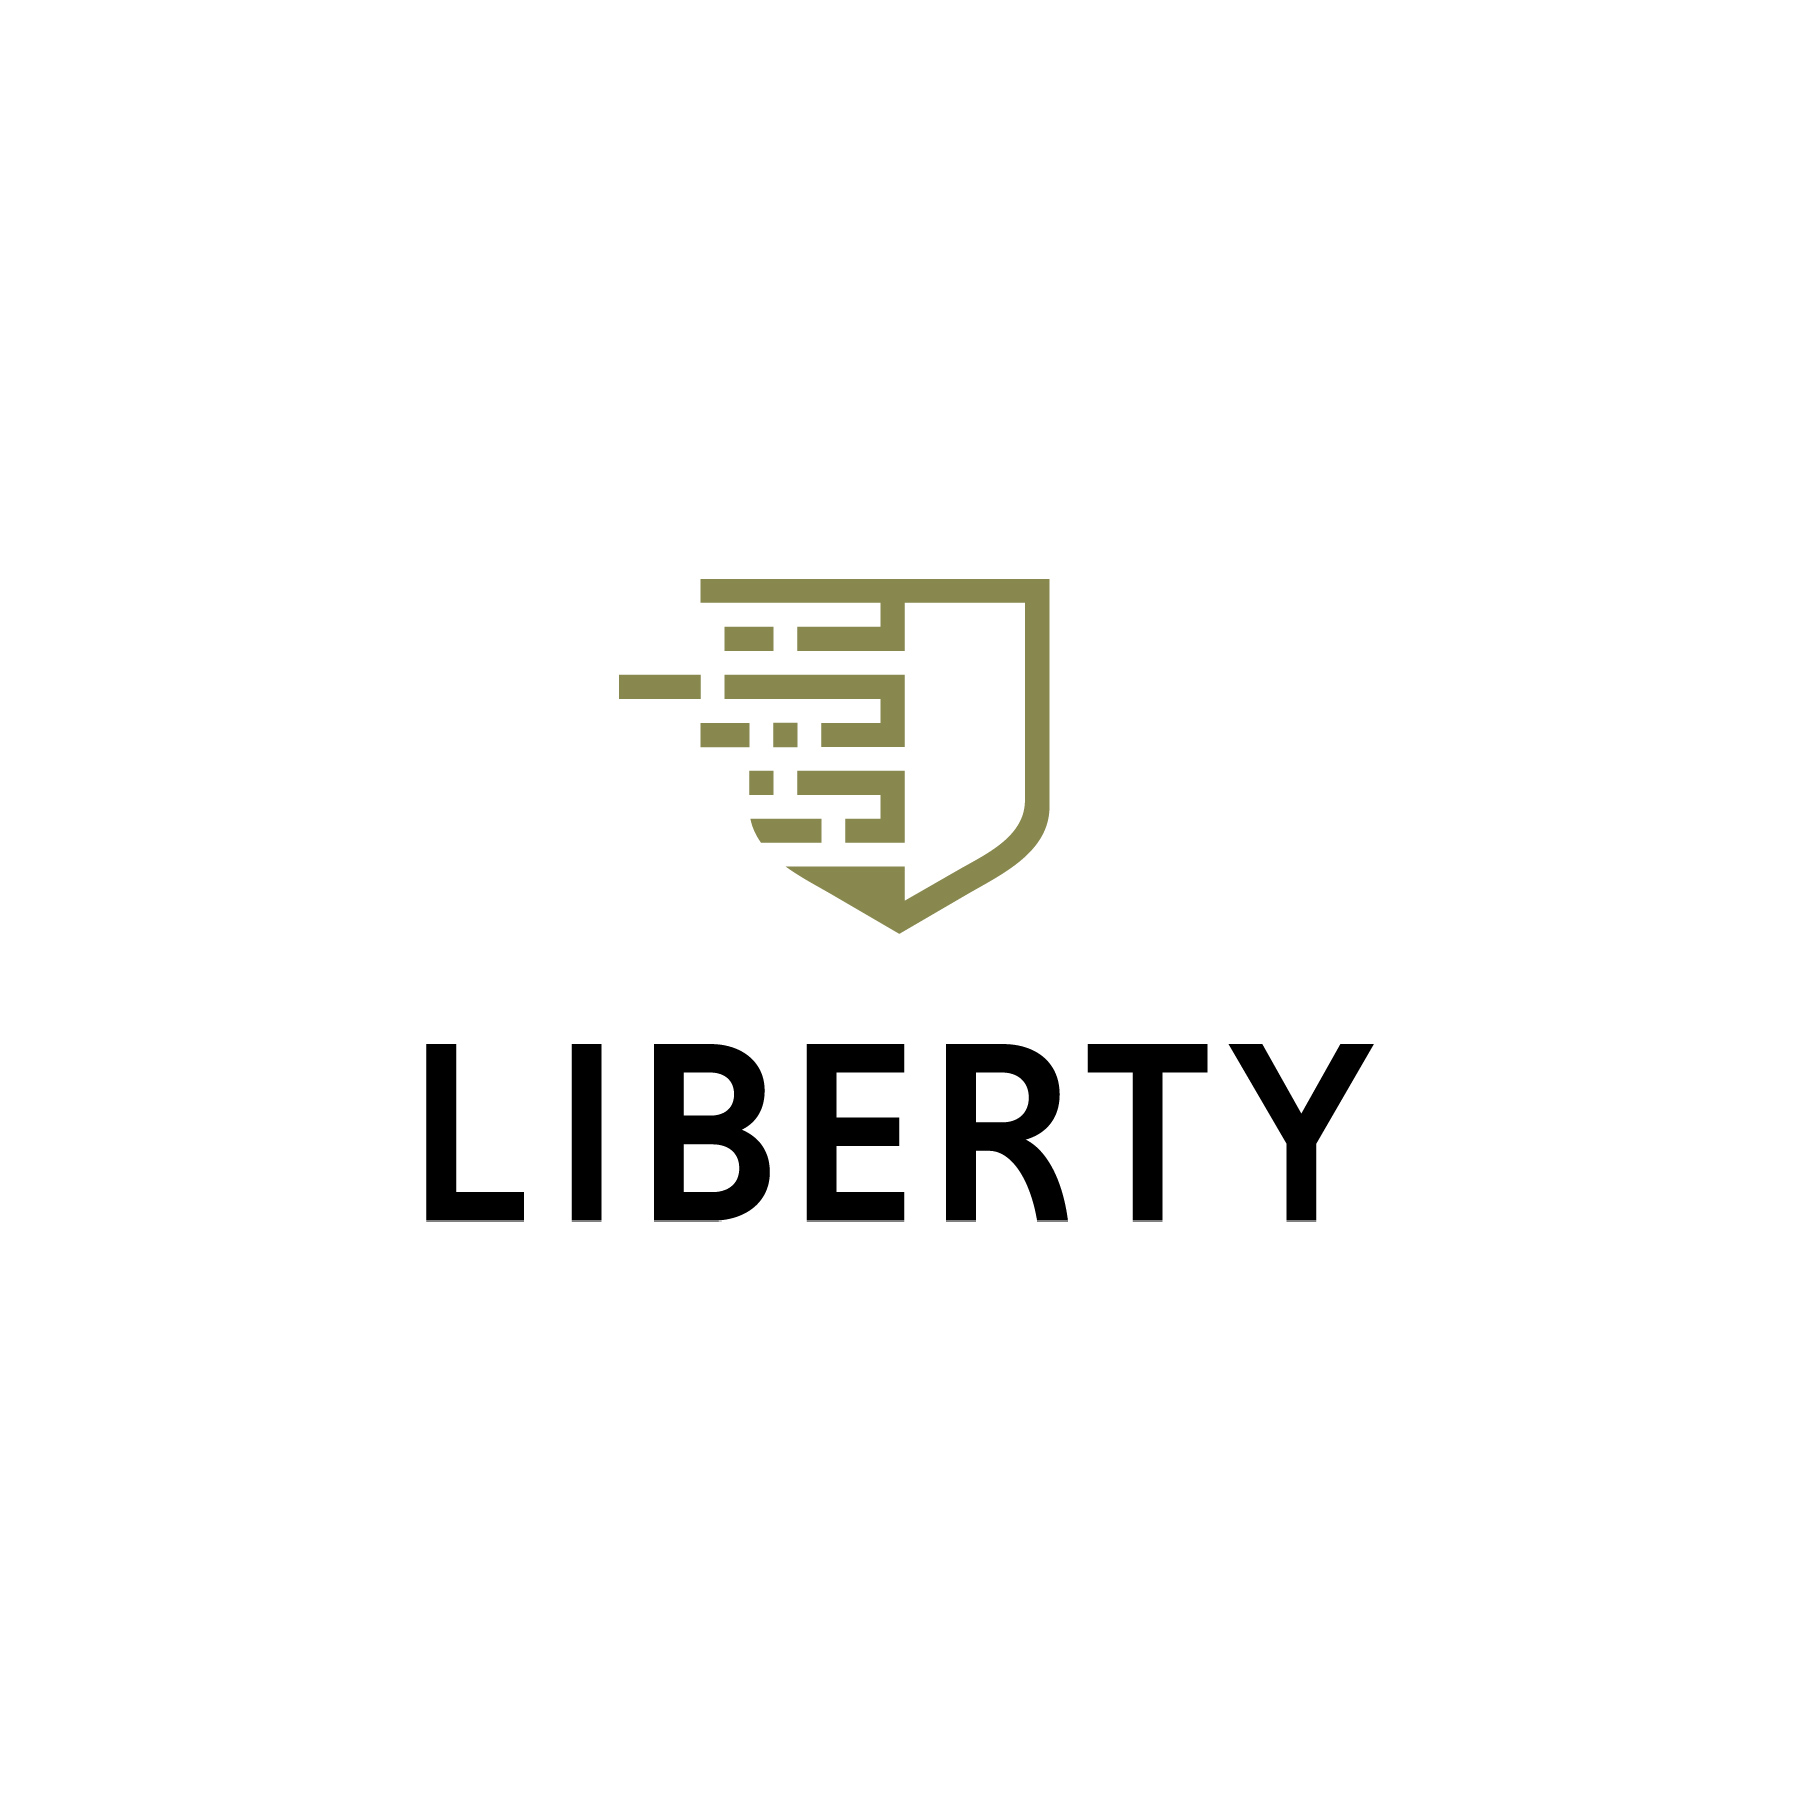 Liberty Blockchain Logo logo design by logo designer Mighty Roar for your inspiration and for the worlds largest logo competition